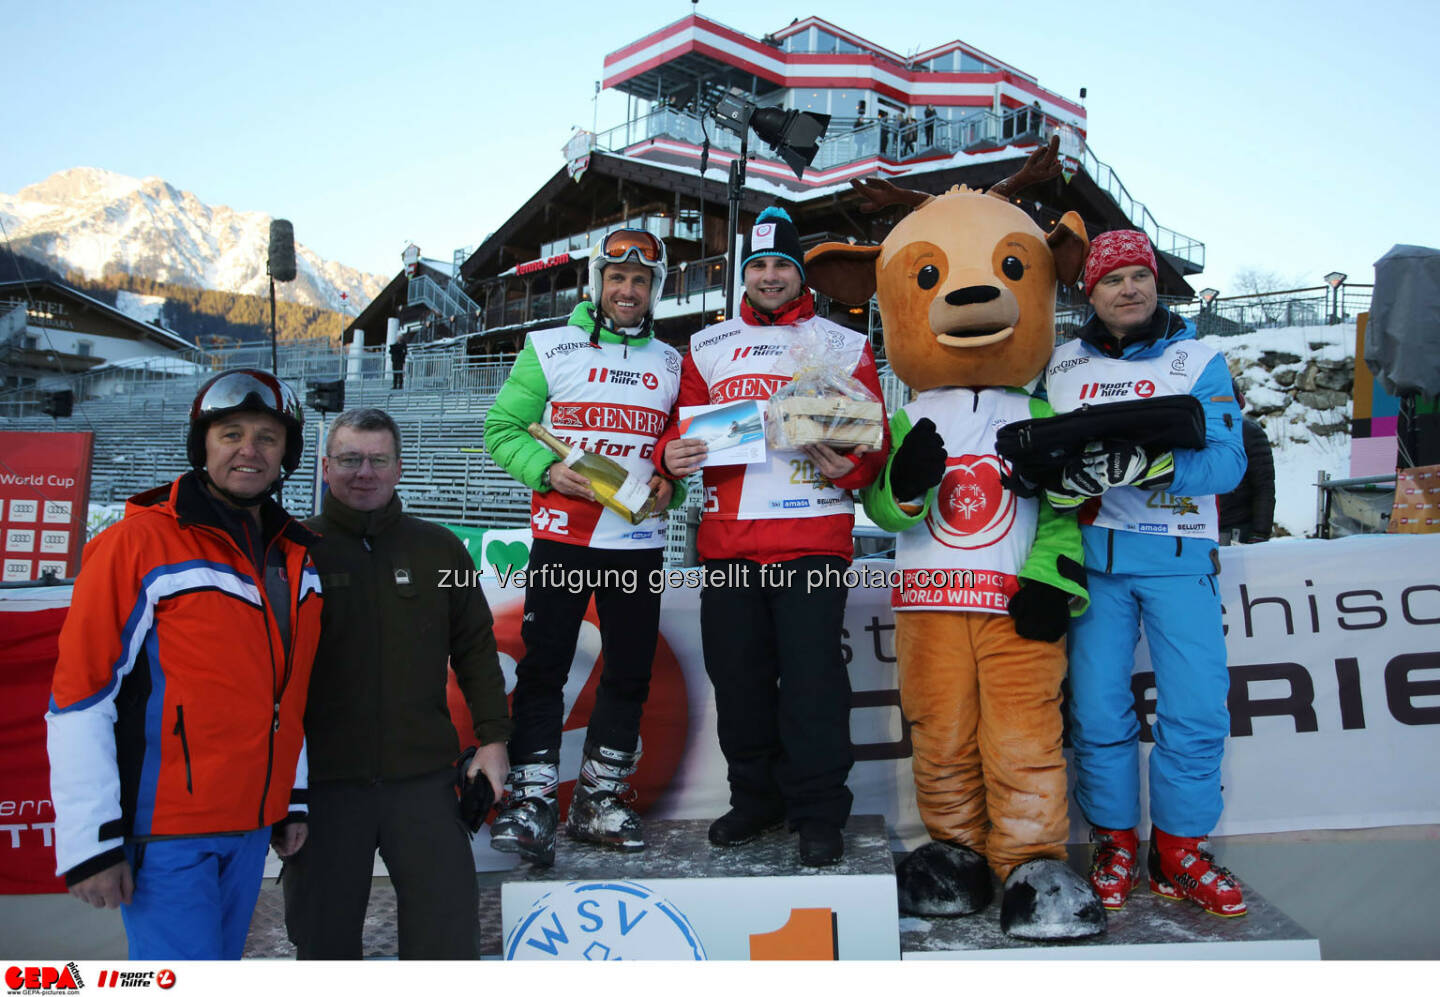 Ski for Gold Charity Race. Image shows managing director Harald Bauer (Sporthilfe), Hannes Zeichen, Thomas Praxmarer, Gilbert Thoeress and maskot Luis. Keywords: Special Olympics World Winter Games, SOWWG Austria 2017 preview. Photo: GEPA pictures/ Daniel Goetzhaber